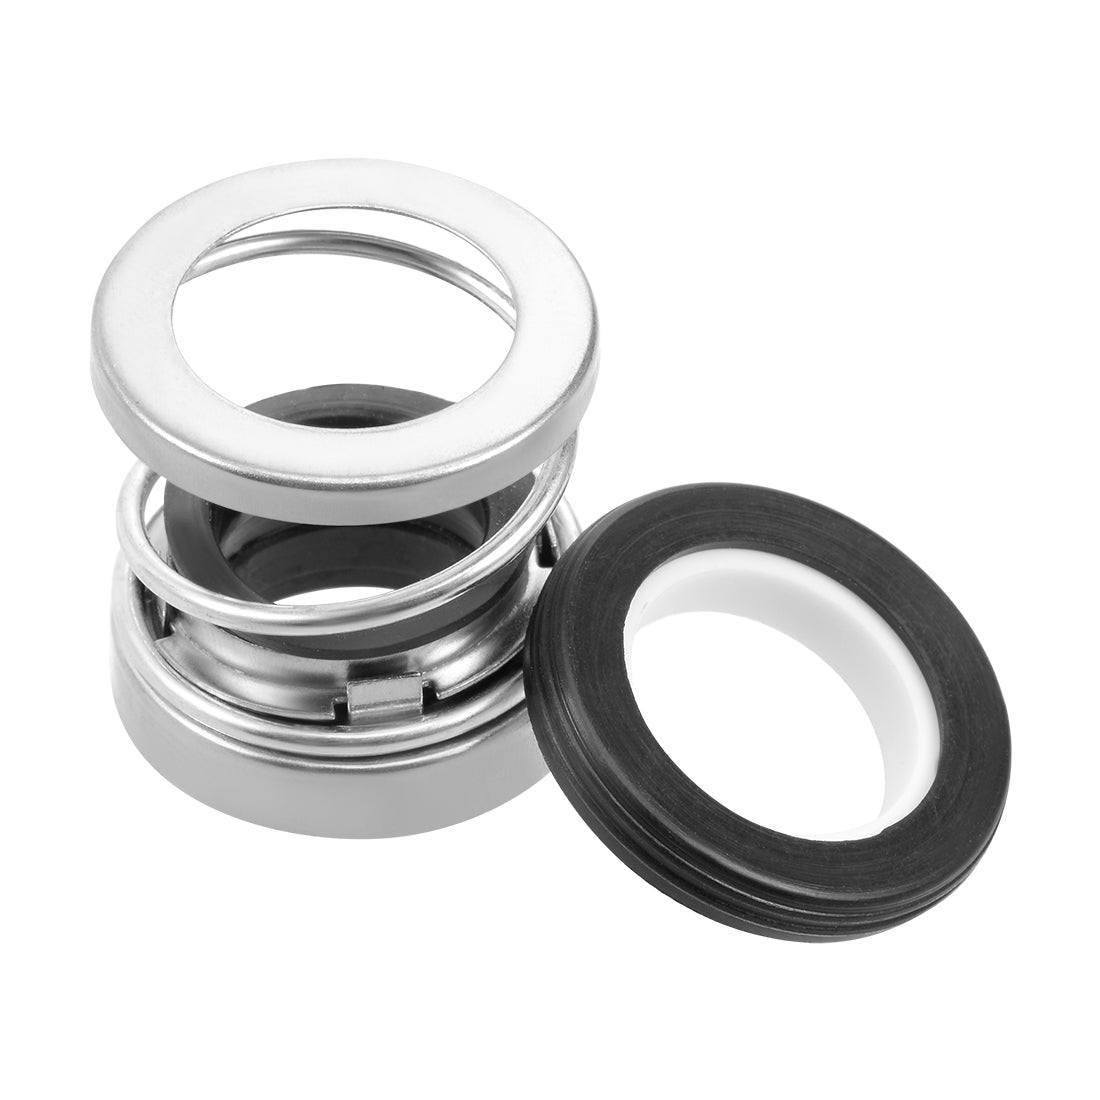 uxcell Uxcell Mechanical Shaft Seal Replacement for Pool Spa Pump 108-16